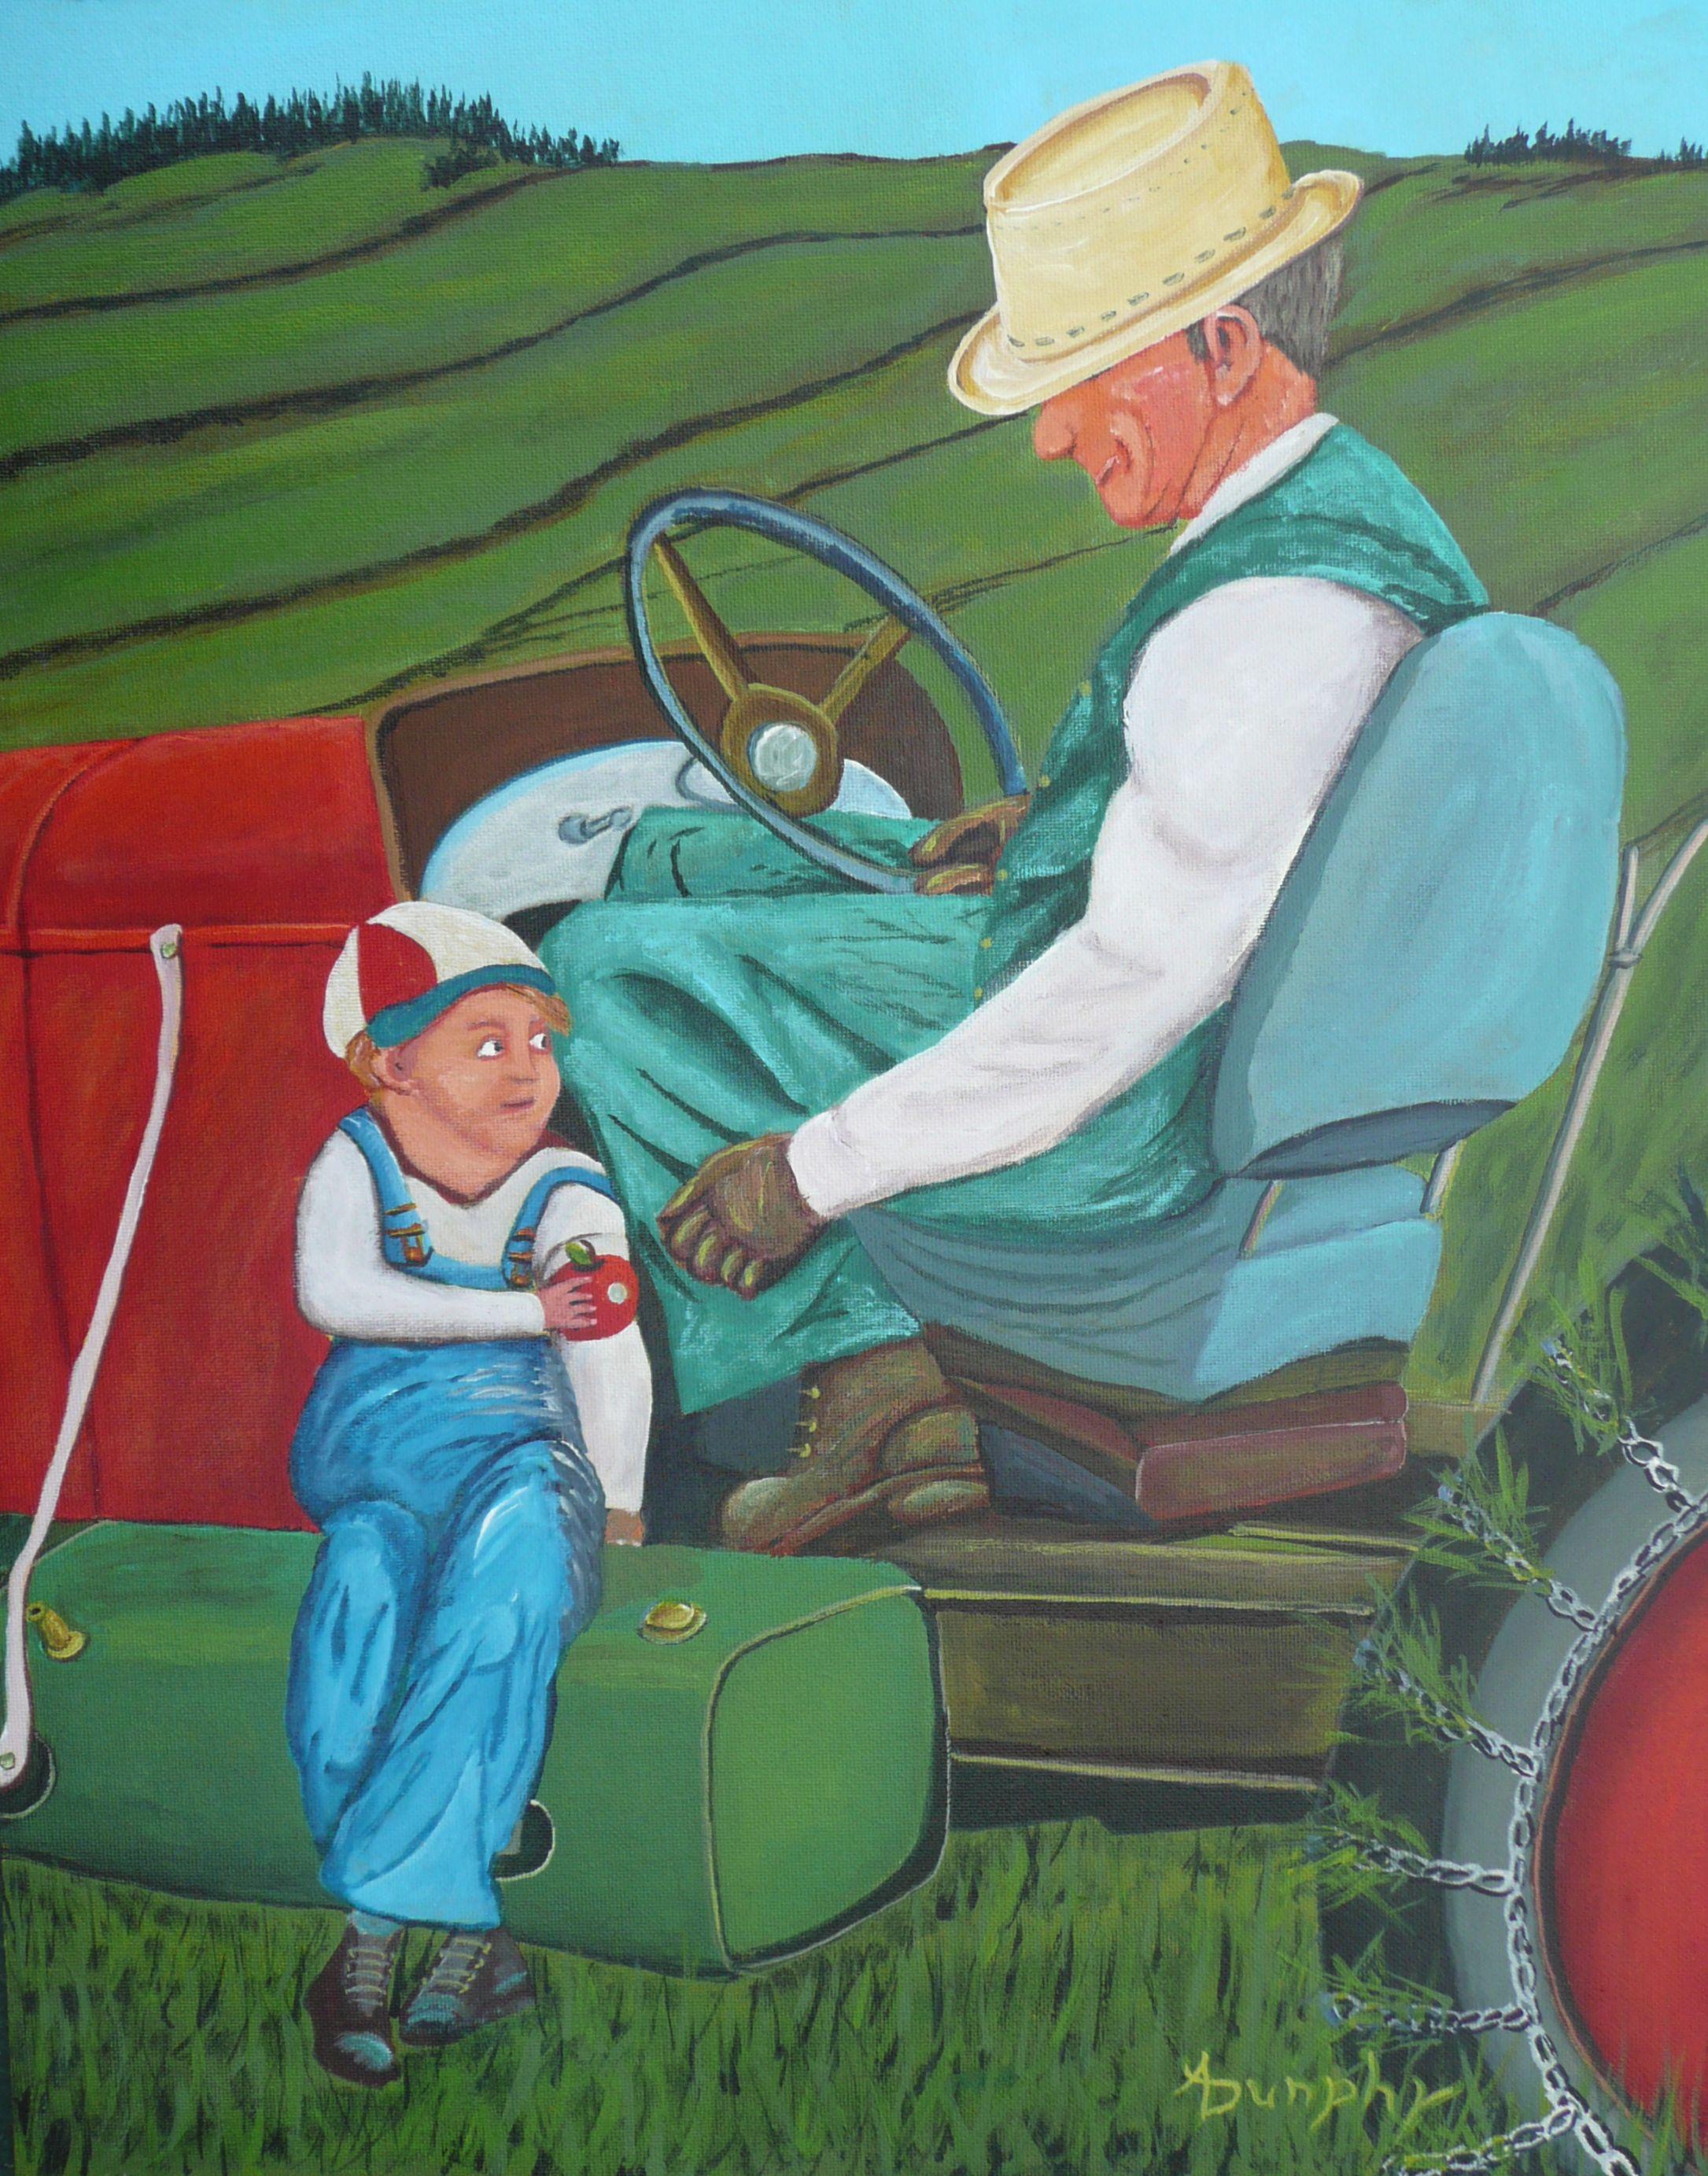 Set during the depression, this father and son sit on his homemade tractor enjoying the day, each others company and an apple. Surely, the best things in life are free. This rural painting has been created using only professional grade acrylics on a